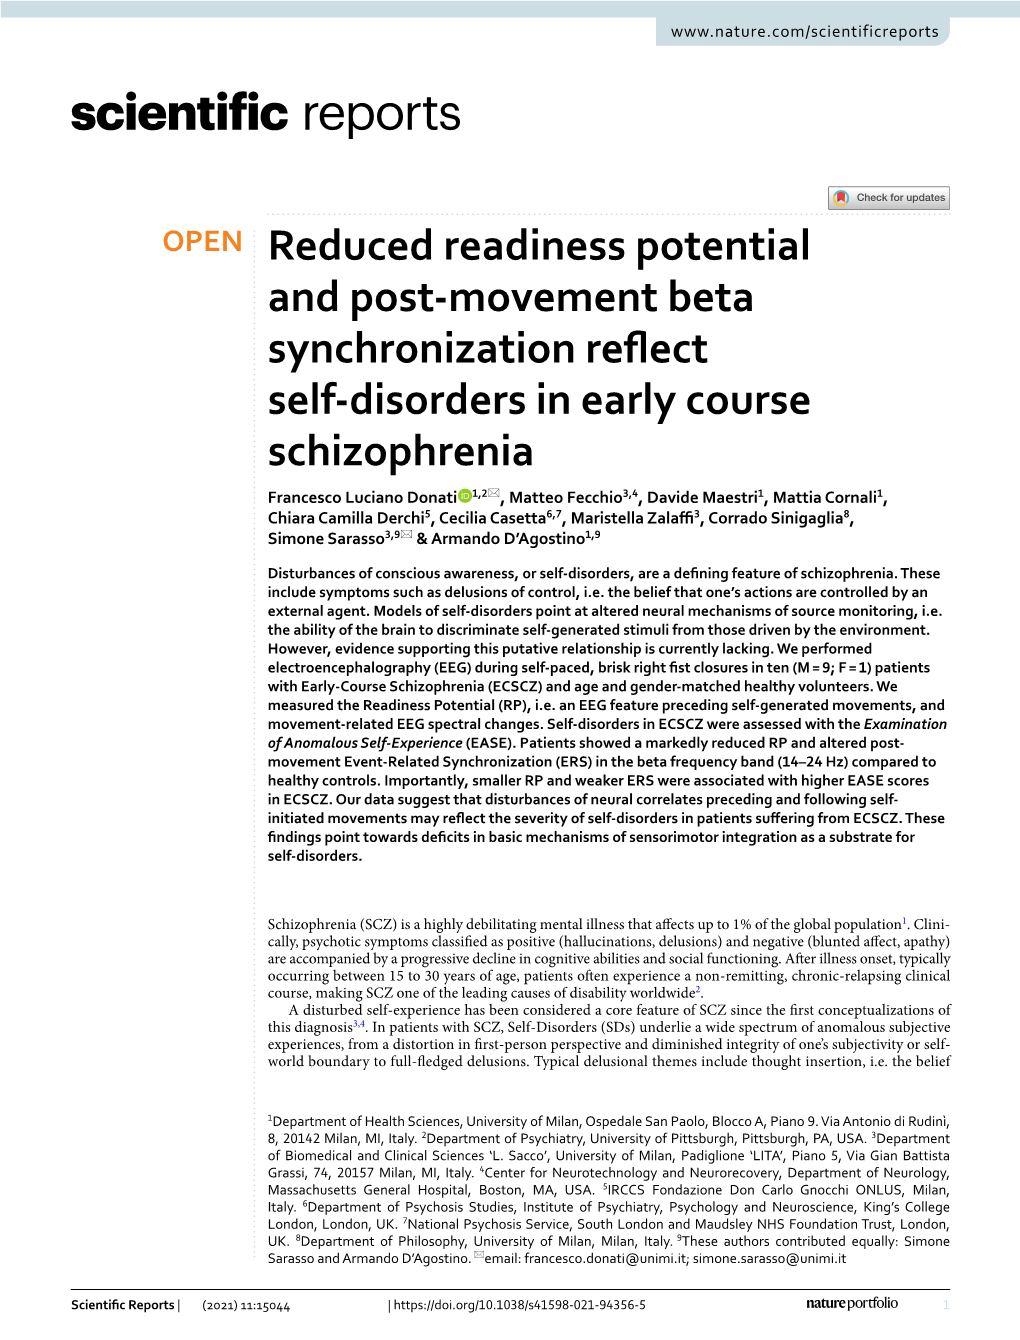 Reduced Readiness Potential and Post-Movement Beta Synchronization